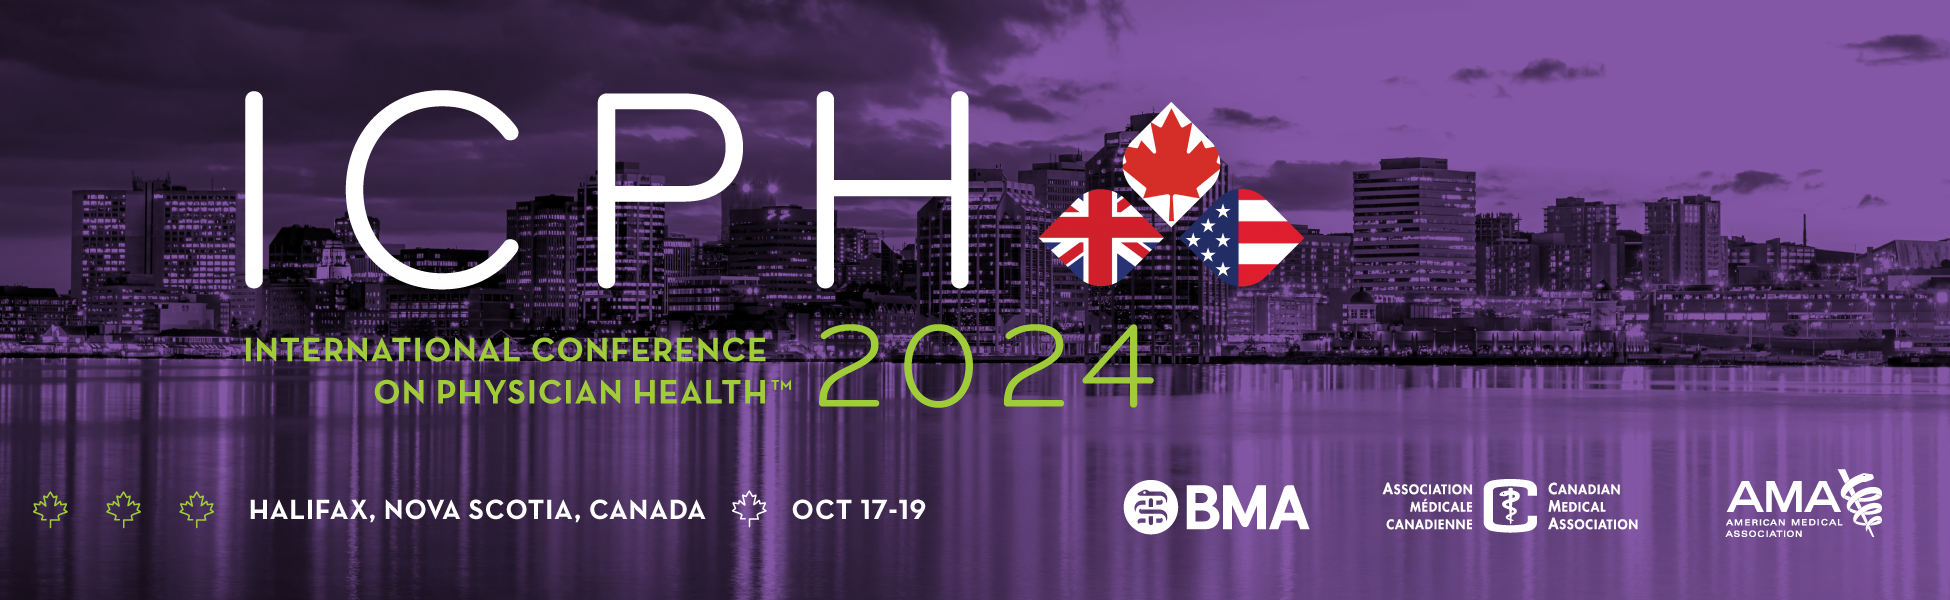 CCPH call for abstracts. Canadian conference on physician health. Canadian Medical Association.